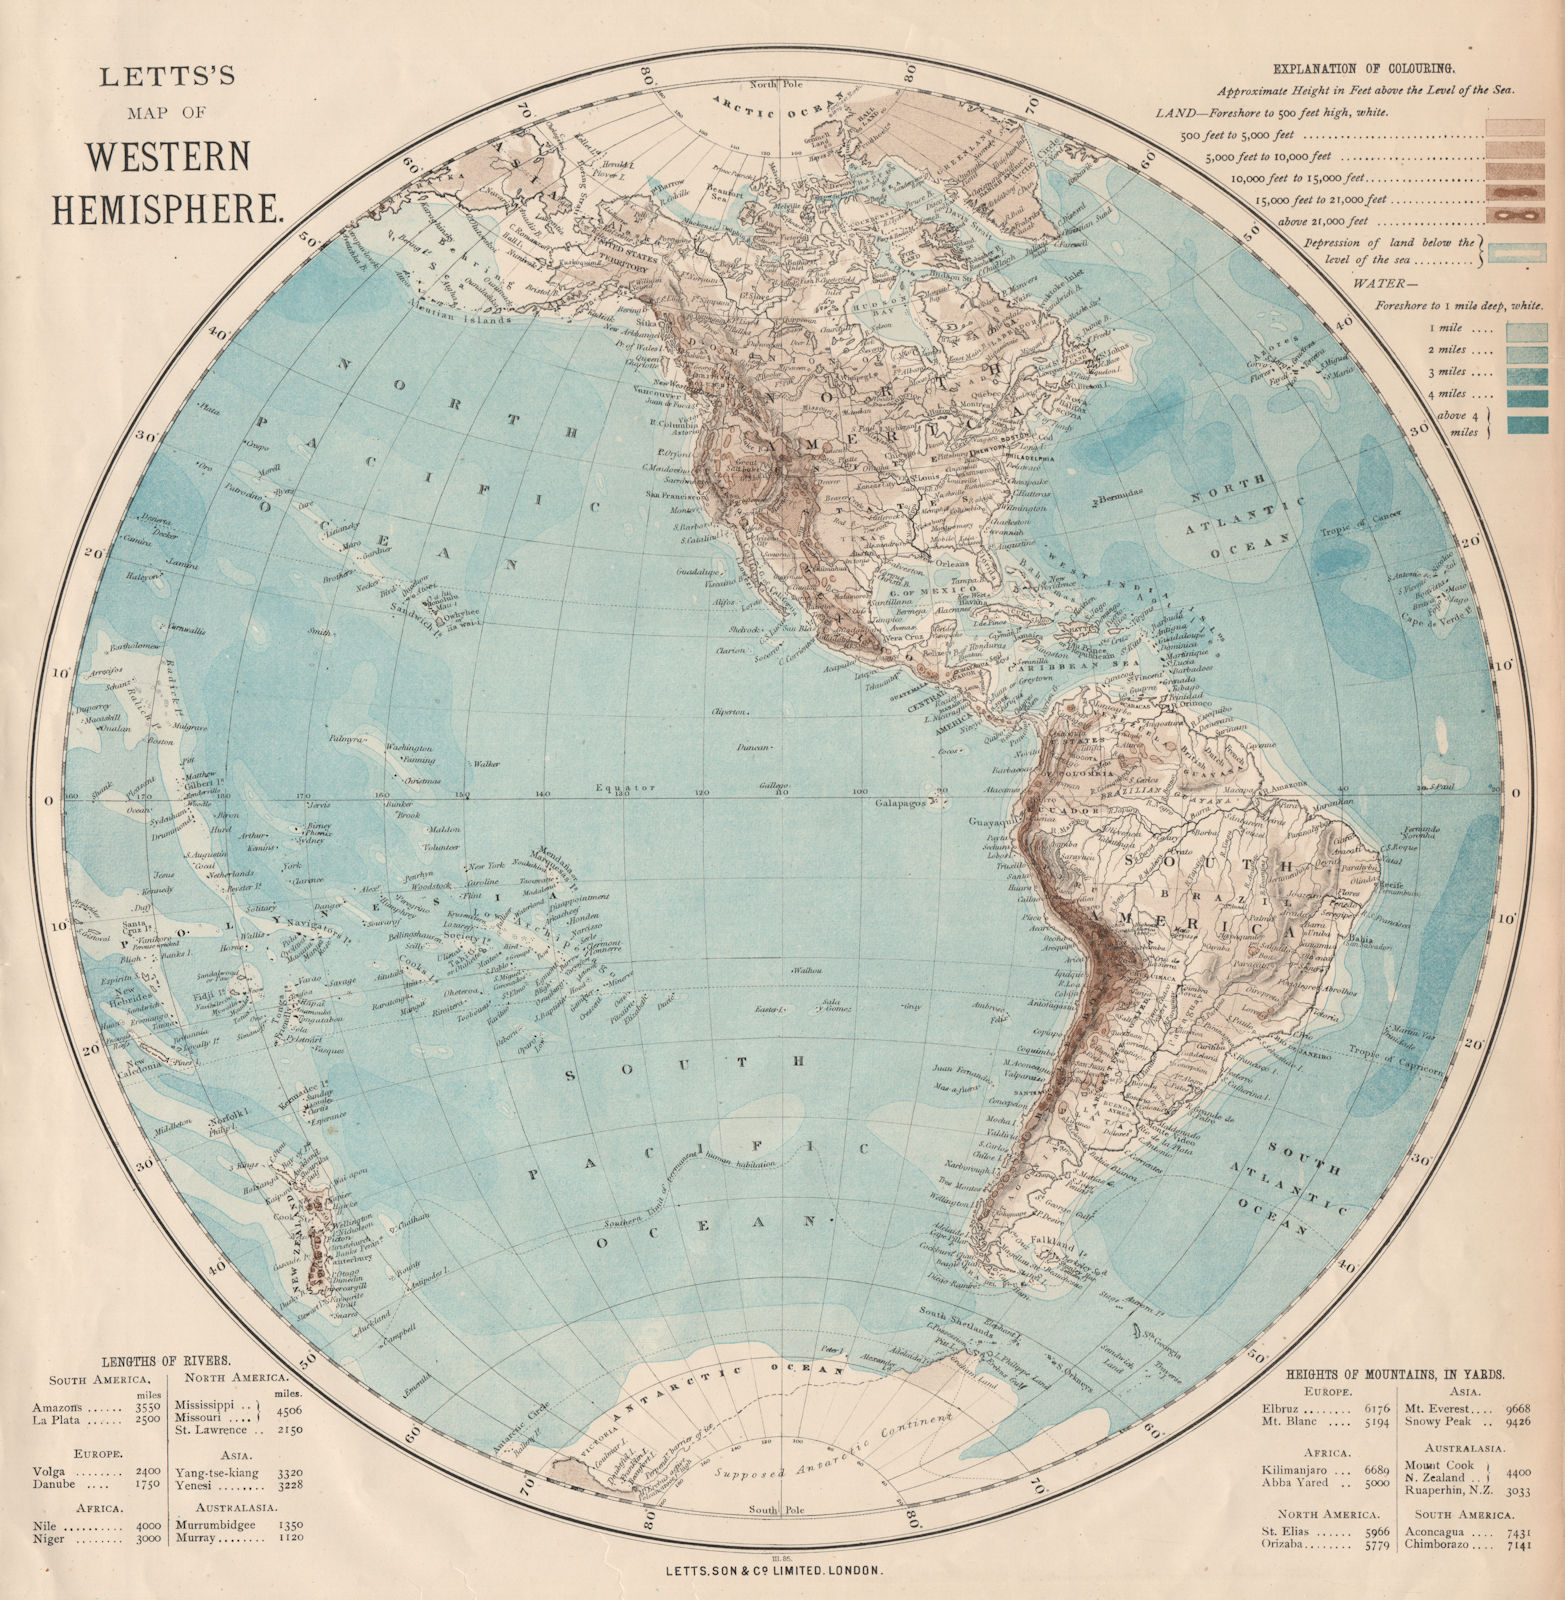 Associate Product WESTERN HEMISPHERE. The Americas; Pacific Ocean; New Zealand. LETTS 1889 map